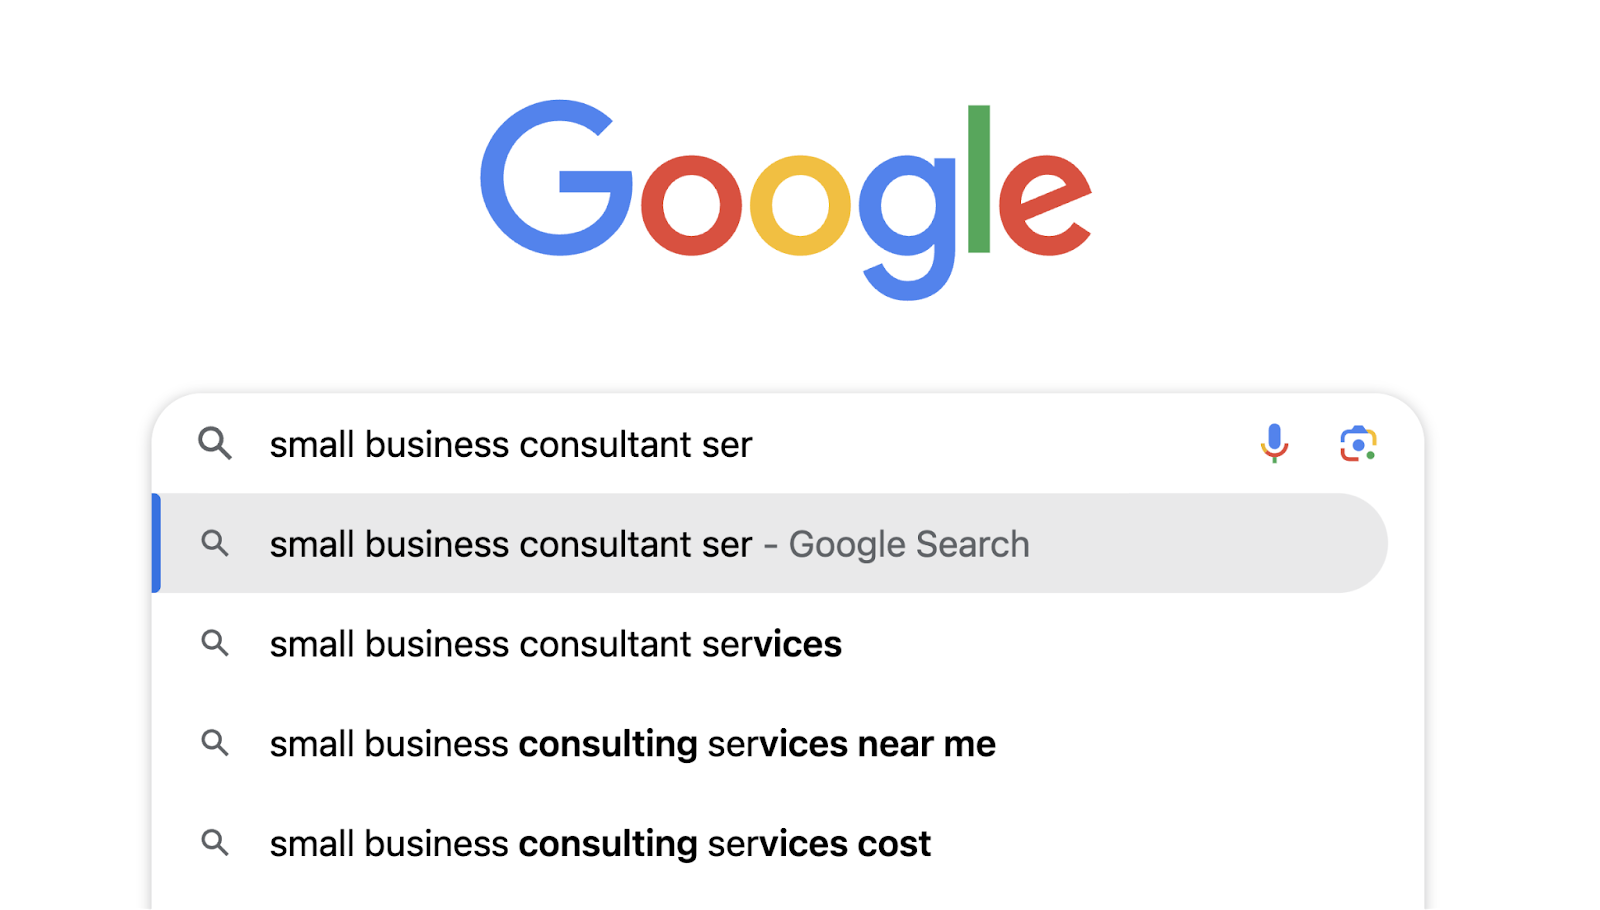 google autocompletes tiny  concern  advisor   to services, services adjacent   me, and services cost